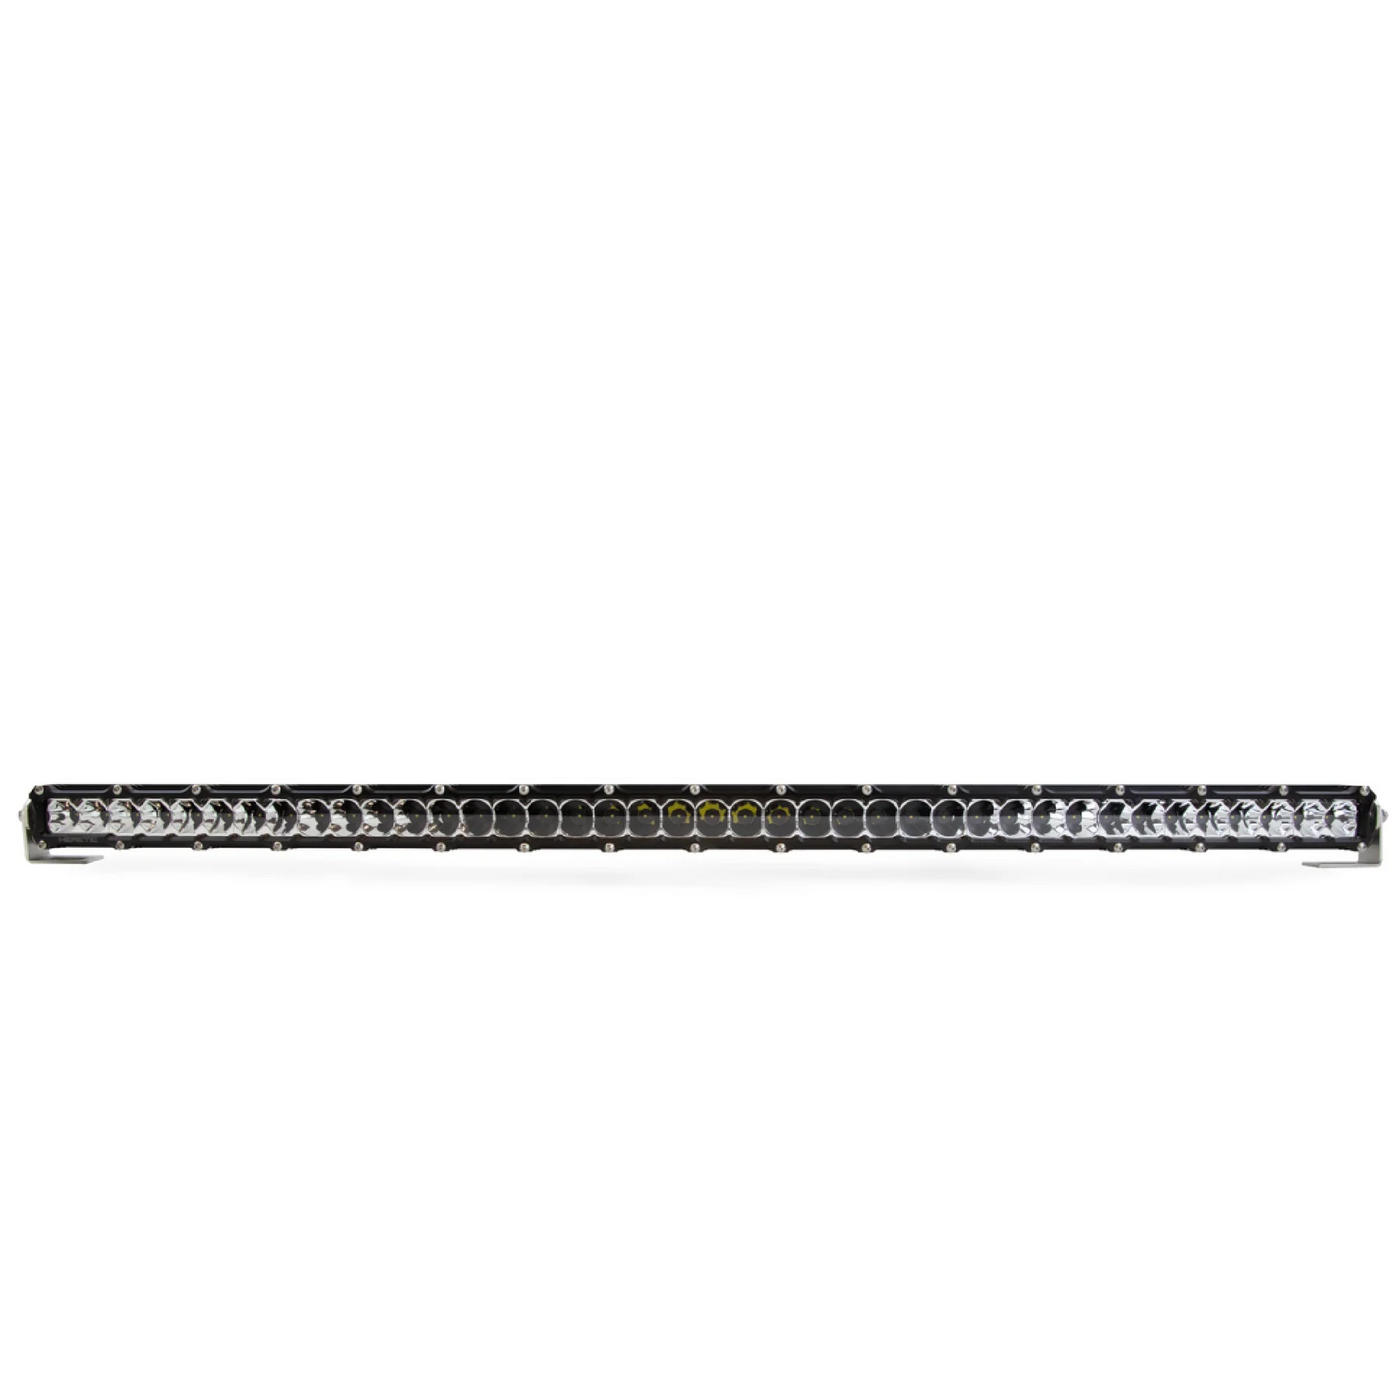 Heretic Curved Light Bar